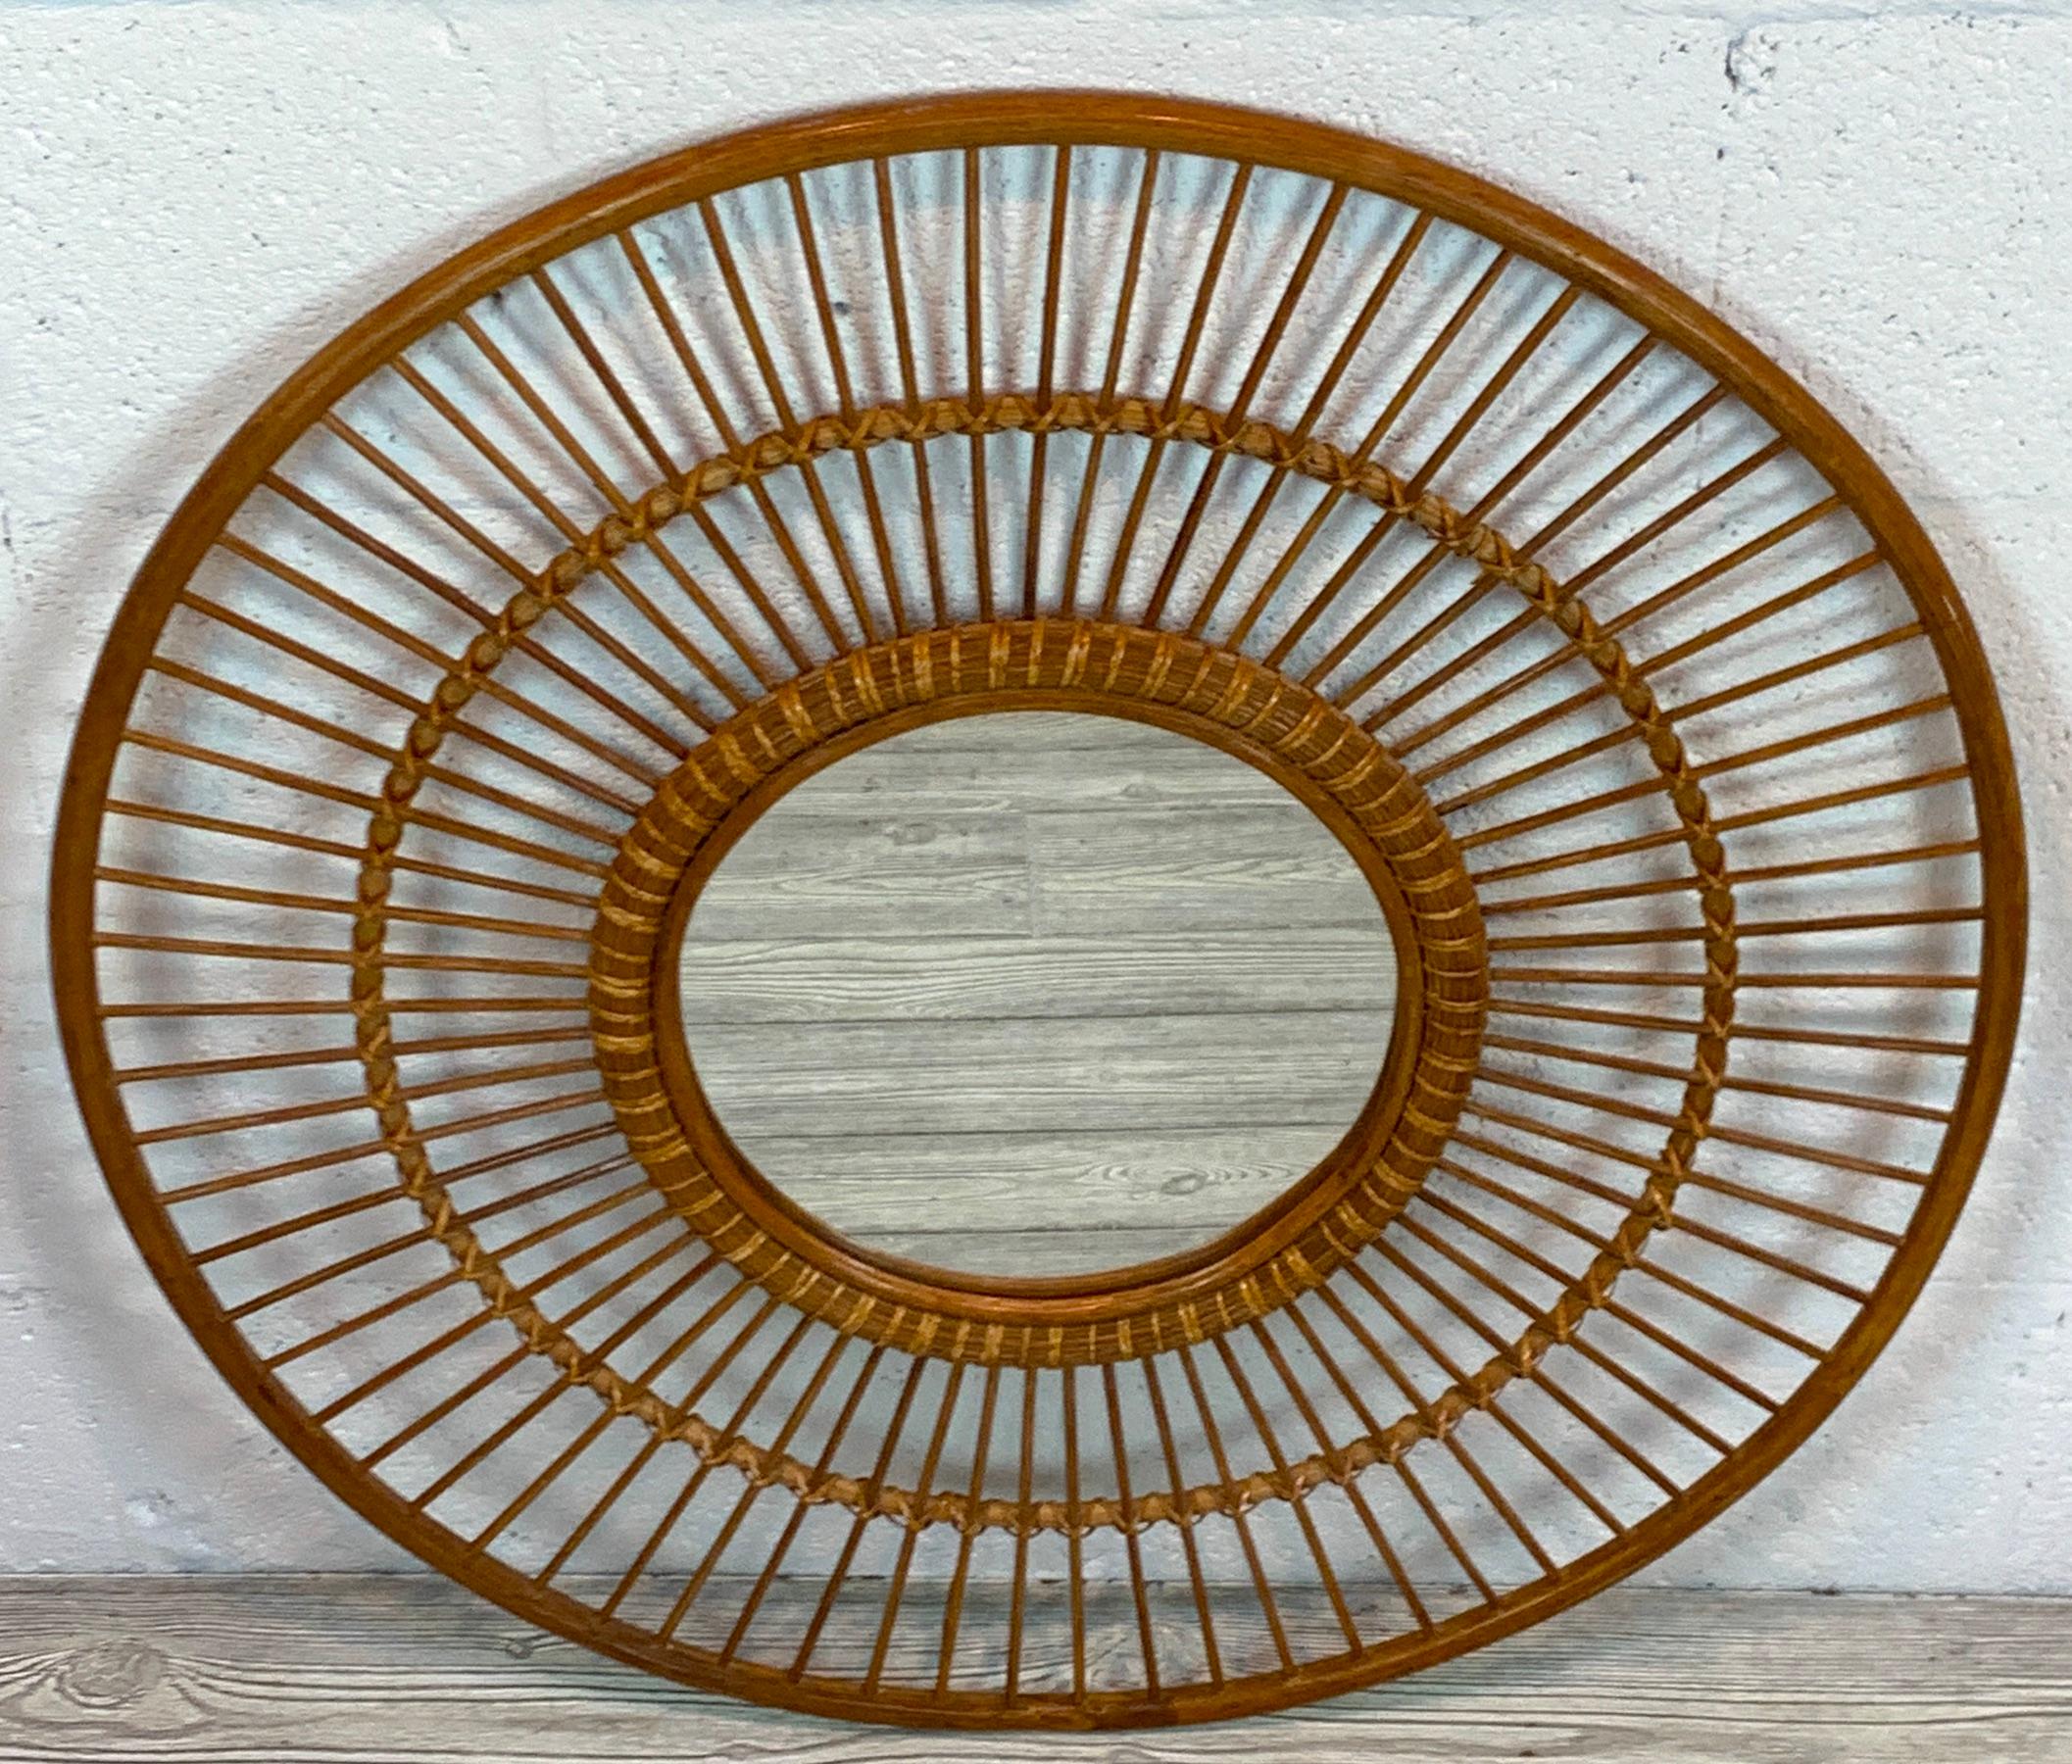 1970s rattan sunburst mirror, finely worked and woven with willow and reed. Complete with an inset 11-inch diameter mirror.
  